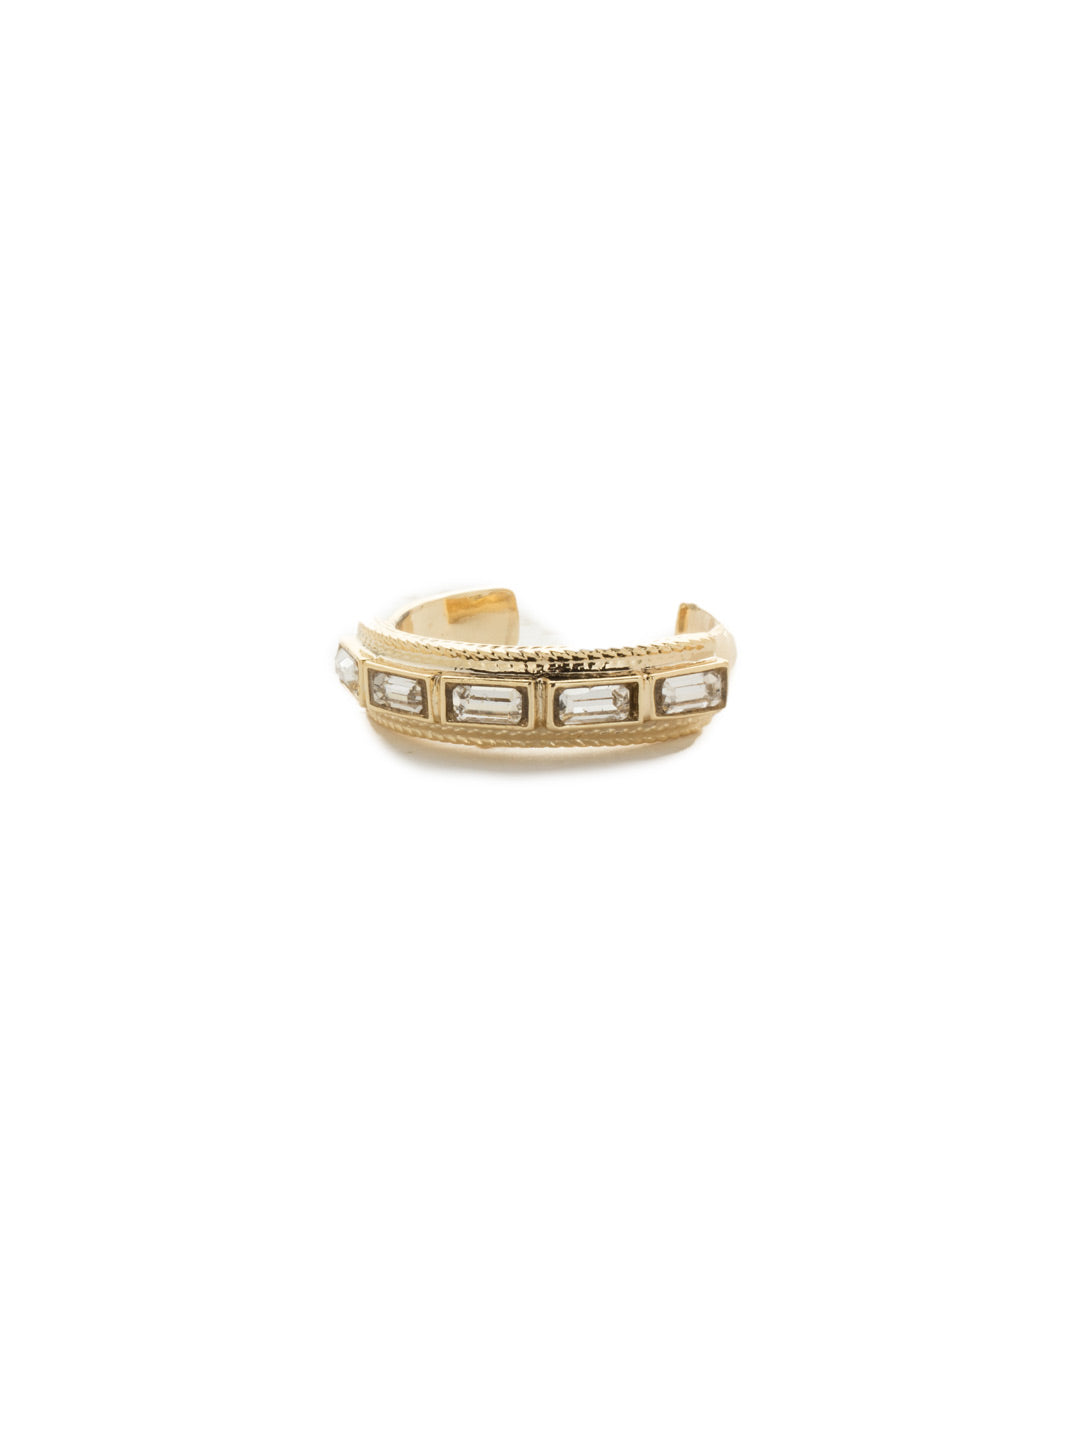 Circadian Crystal Band Ring - 4REK39BGCRY - <p>Sparkly, but edgy, the baquette cut crystals on this adjustable band are set in our brilliant gold plated finish. From Sorrelli's Crystal collection in our Bright Gold-tone finish.</p>